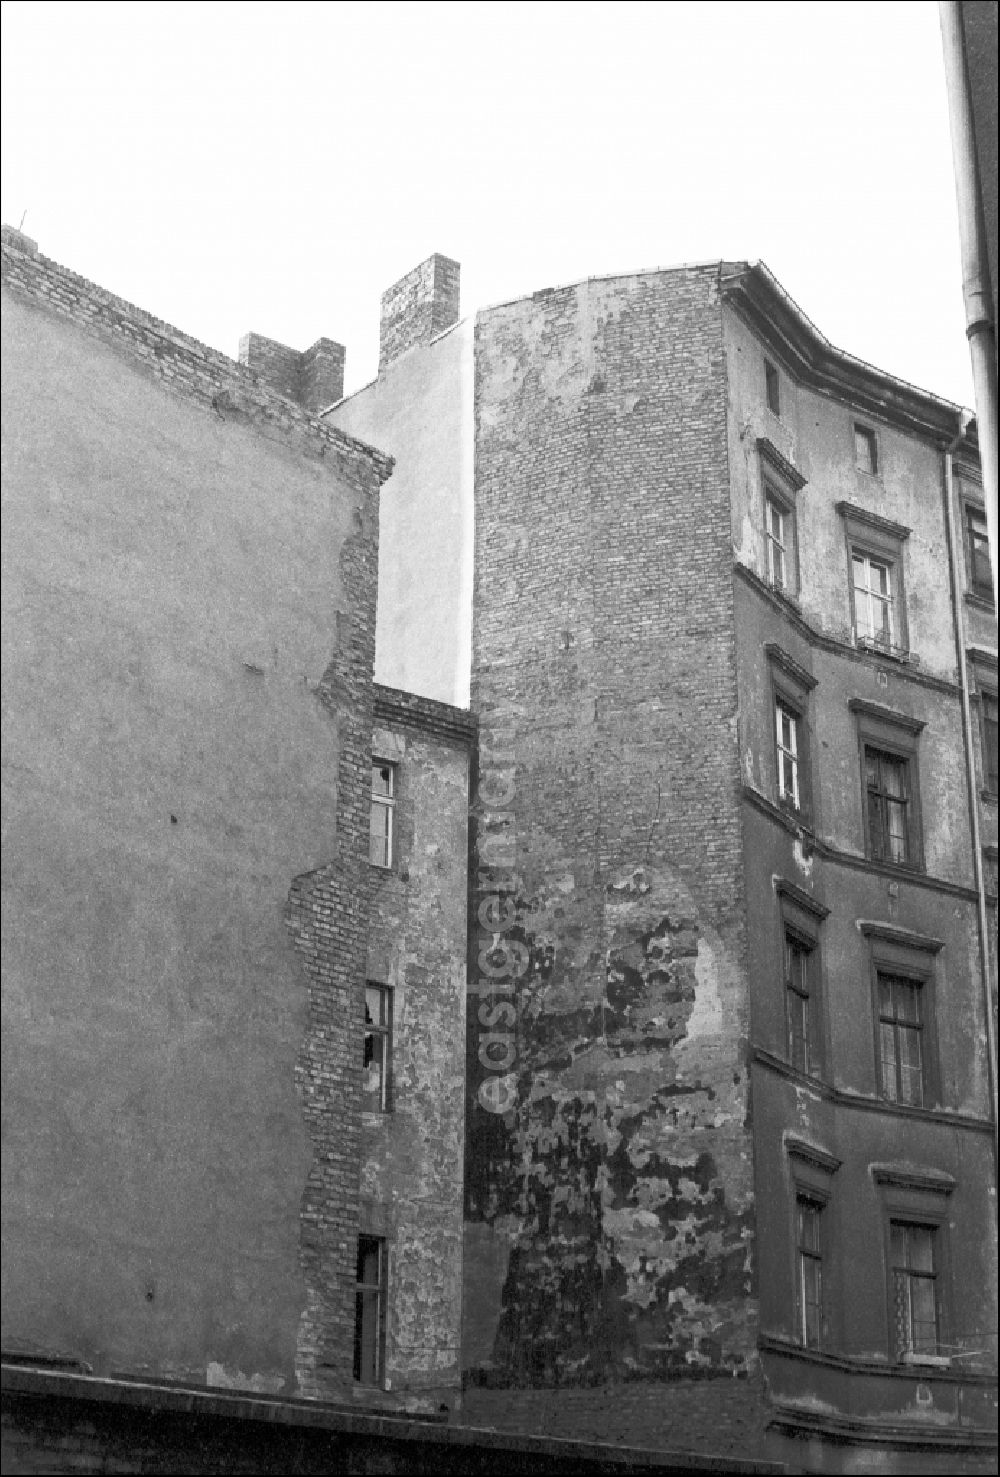 GDR picture archive: Berlin - Facades and gables in Mitte and Prenzlauer Berg in East Berlin on the territory of the former GDR, German Democratic Republic